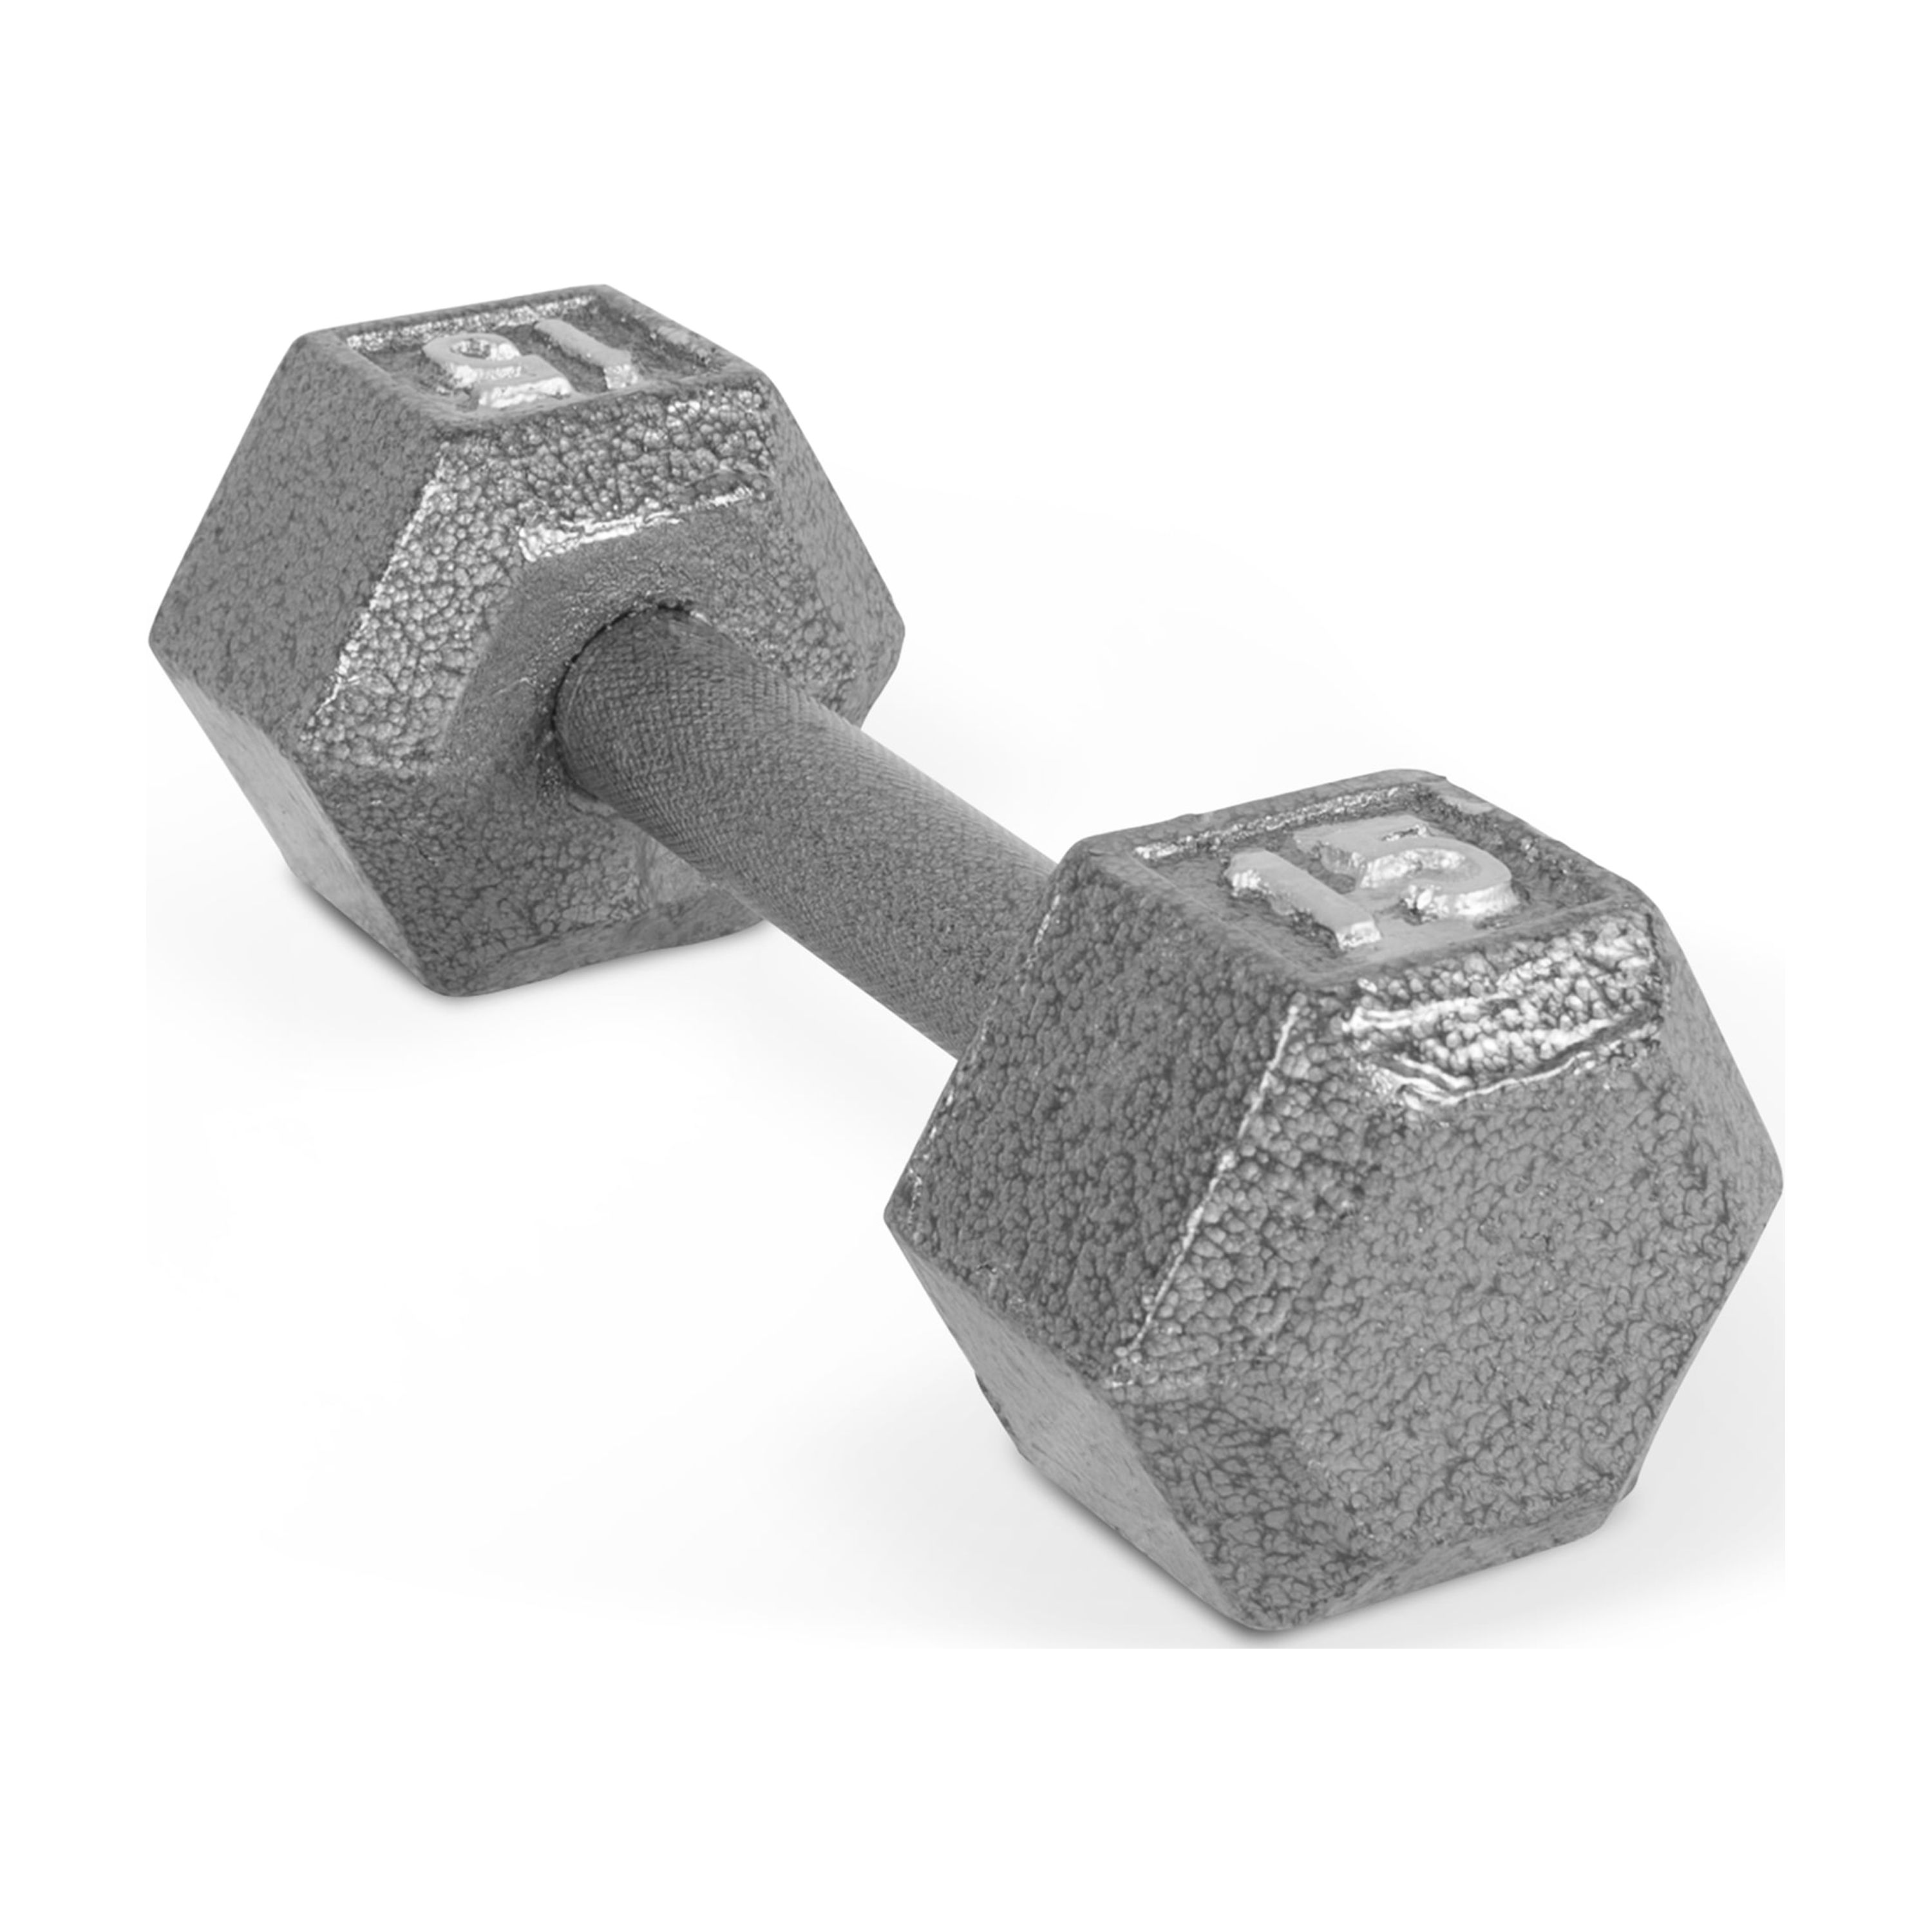 CAP Barbell 15lb Cast Iron Hex Dumbbell, Single - image 1 of 5